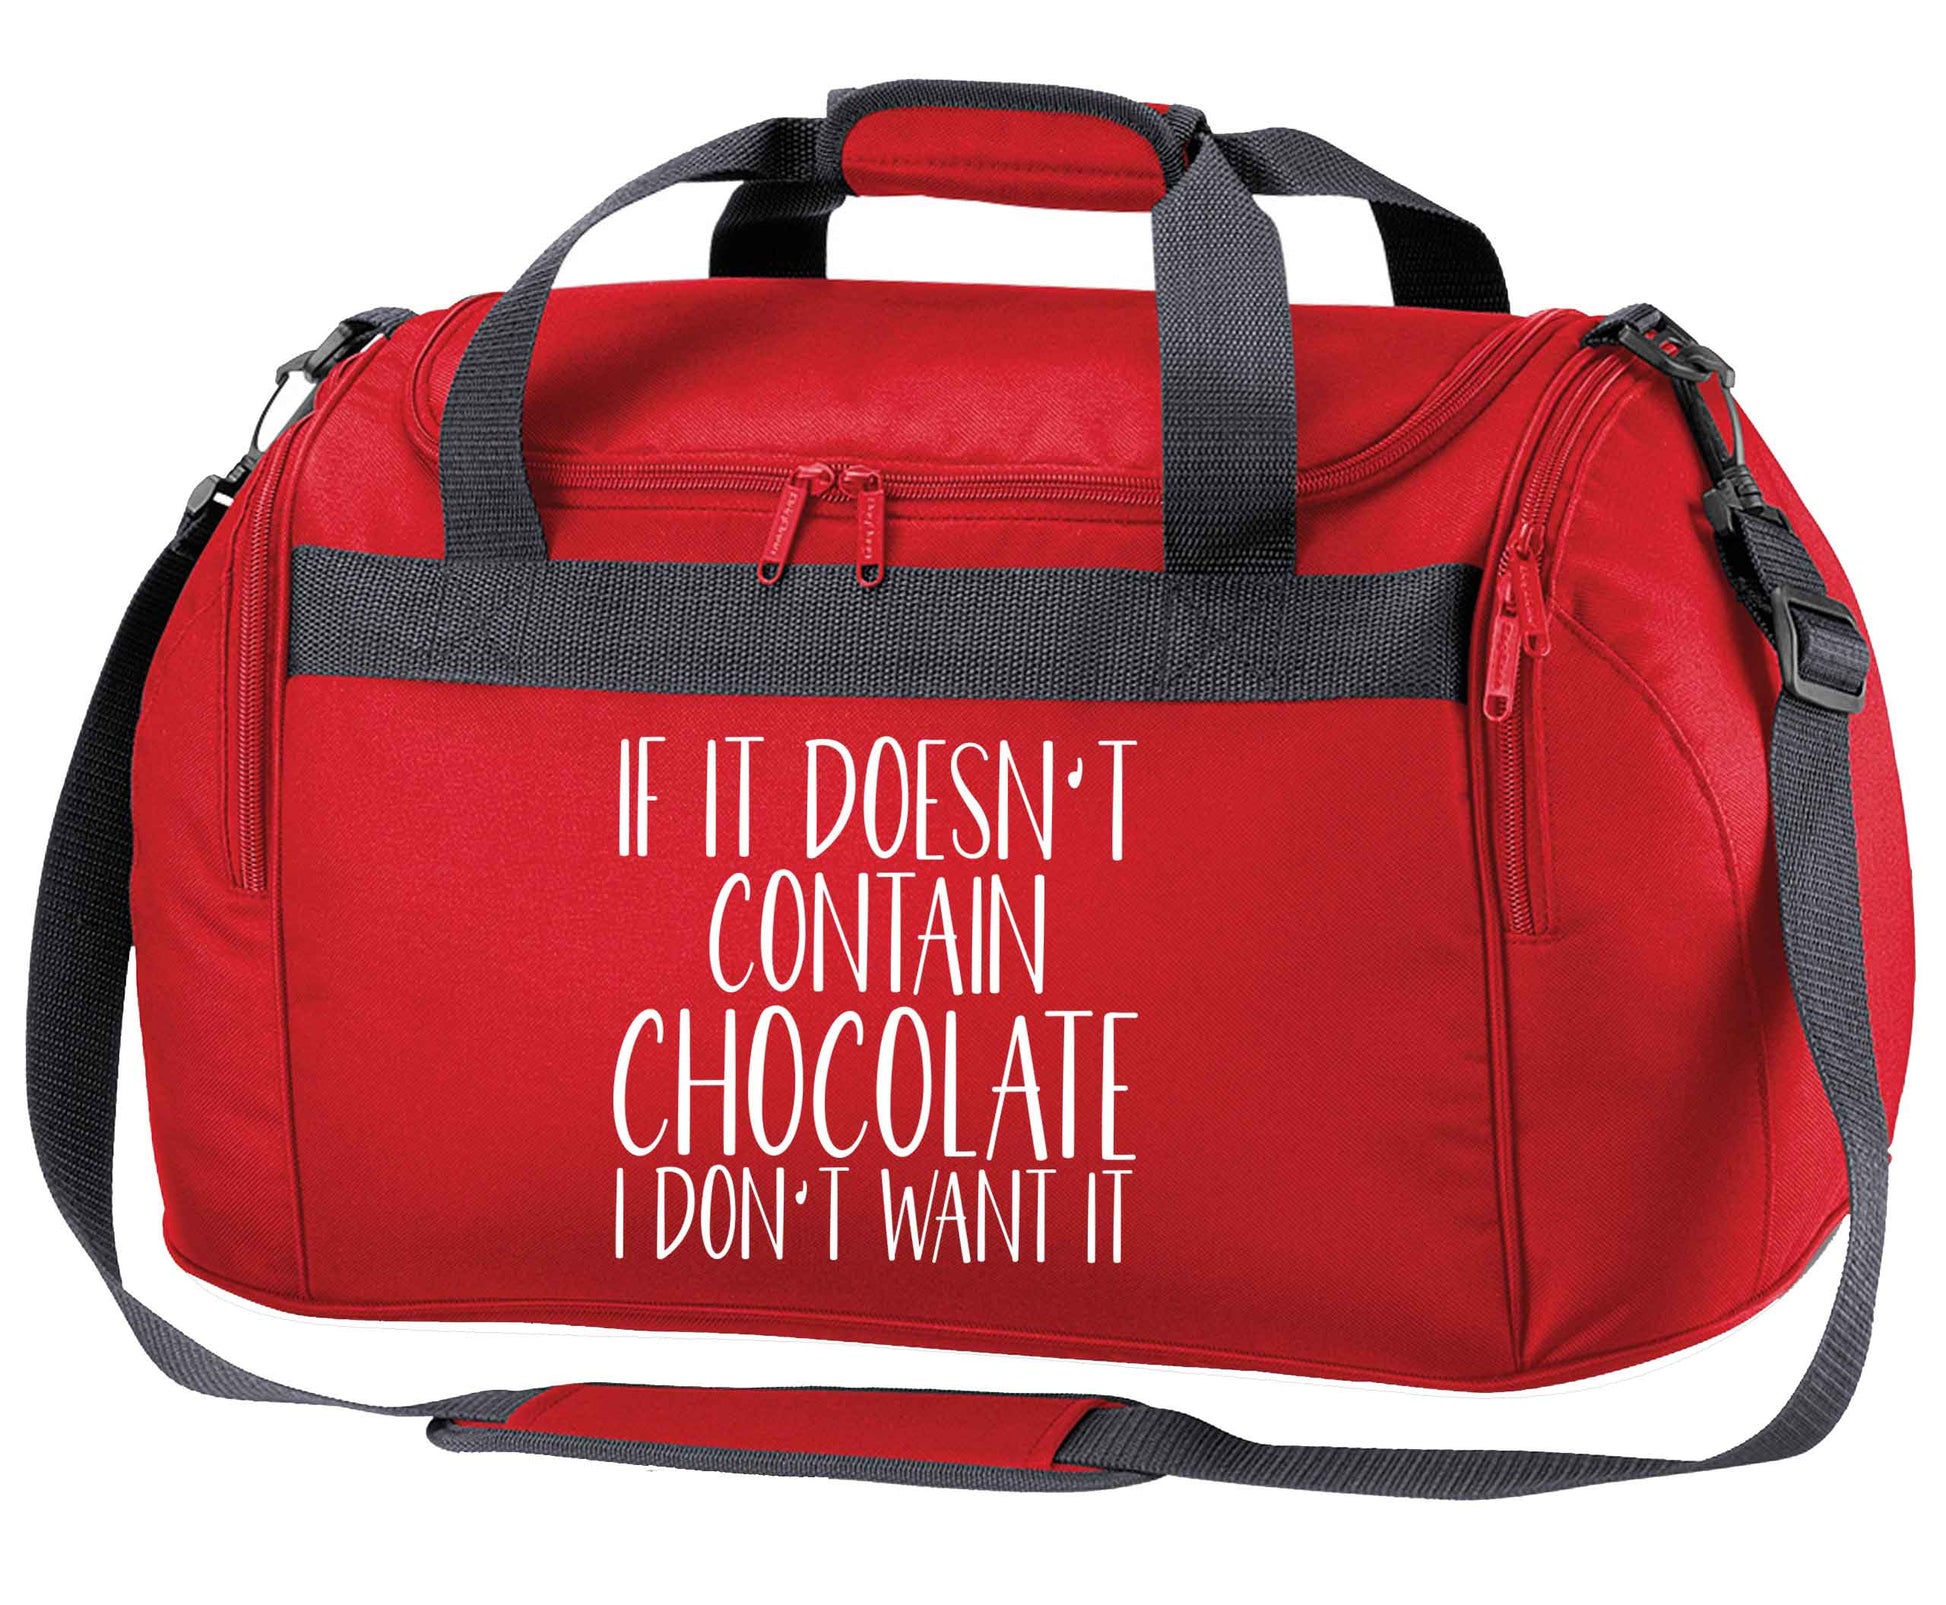 If it doesn't contain chocolate I don't want it red holdall / duffel bag